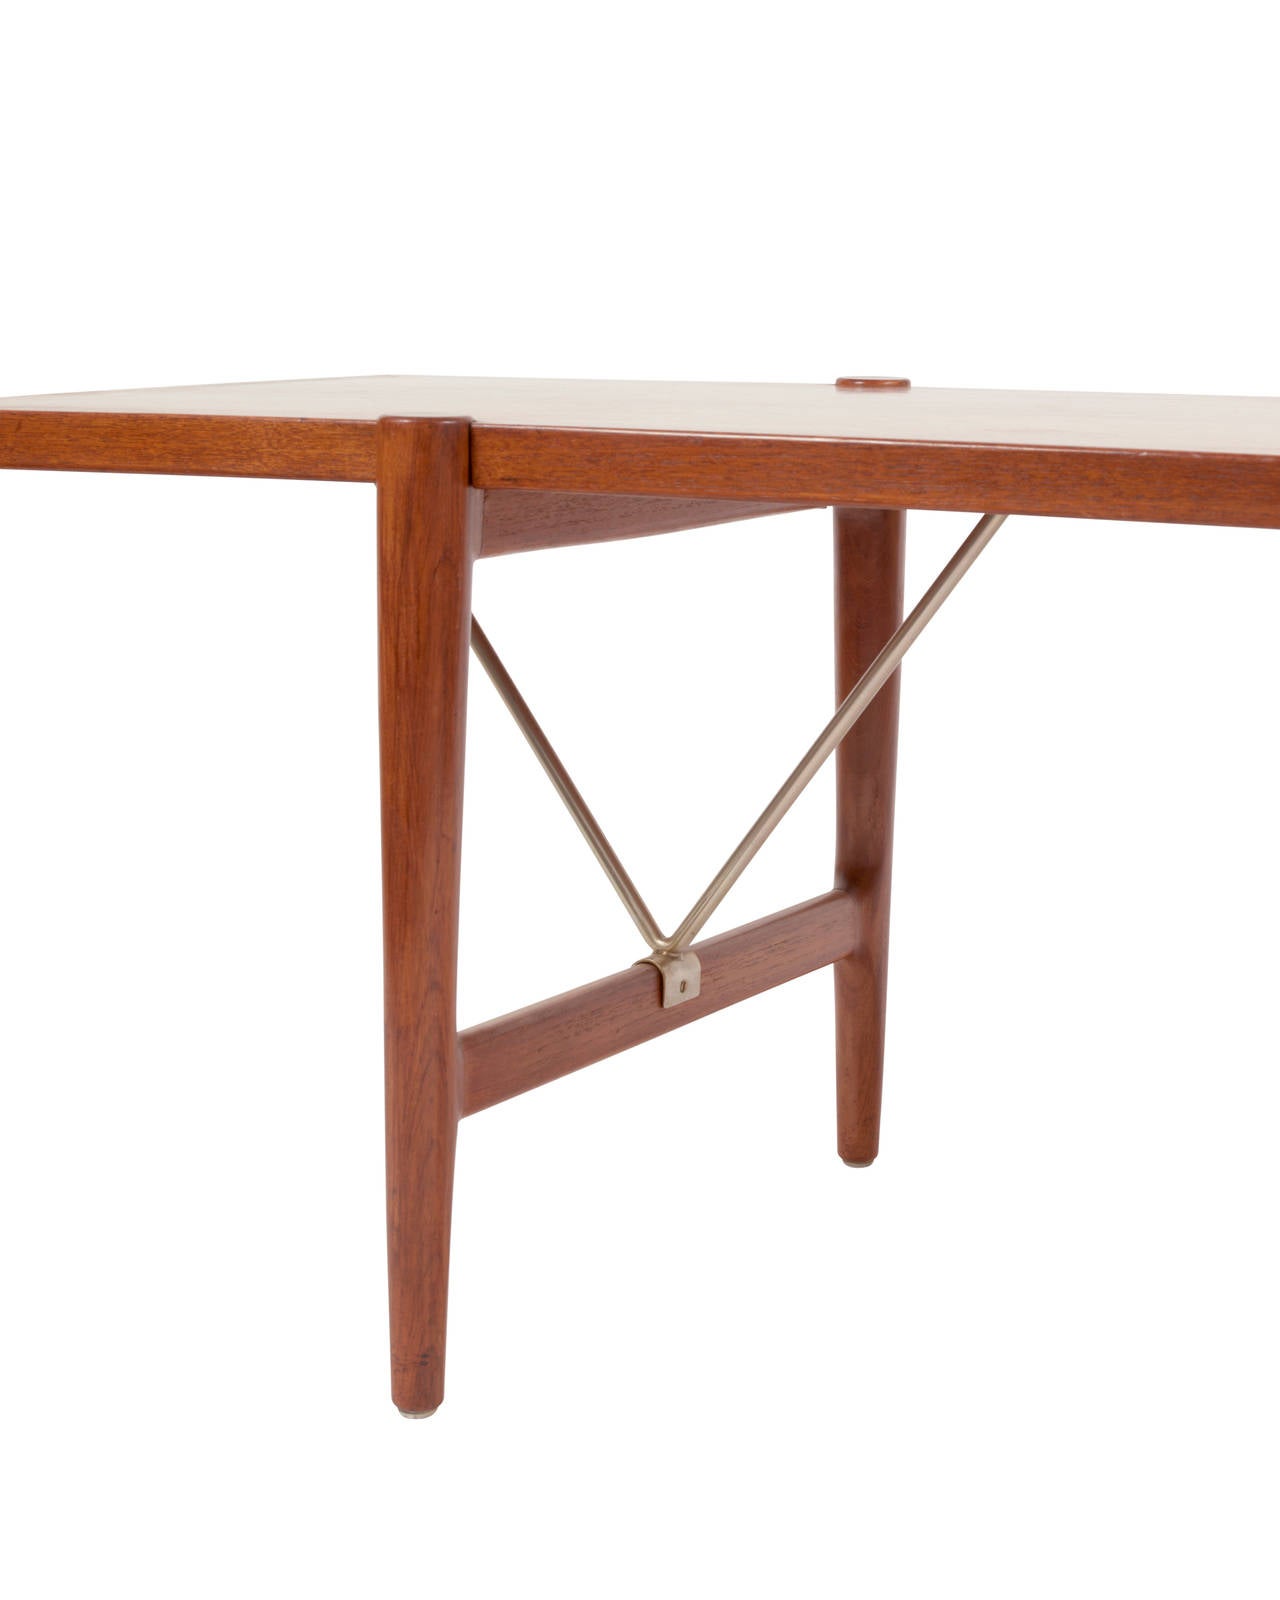 A solid teak coffee table with brass stretchers